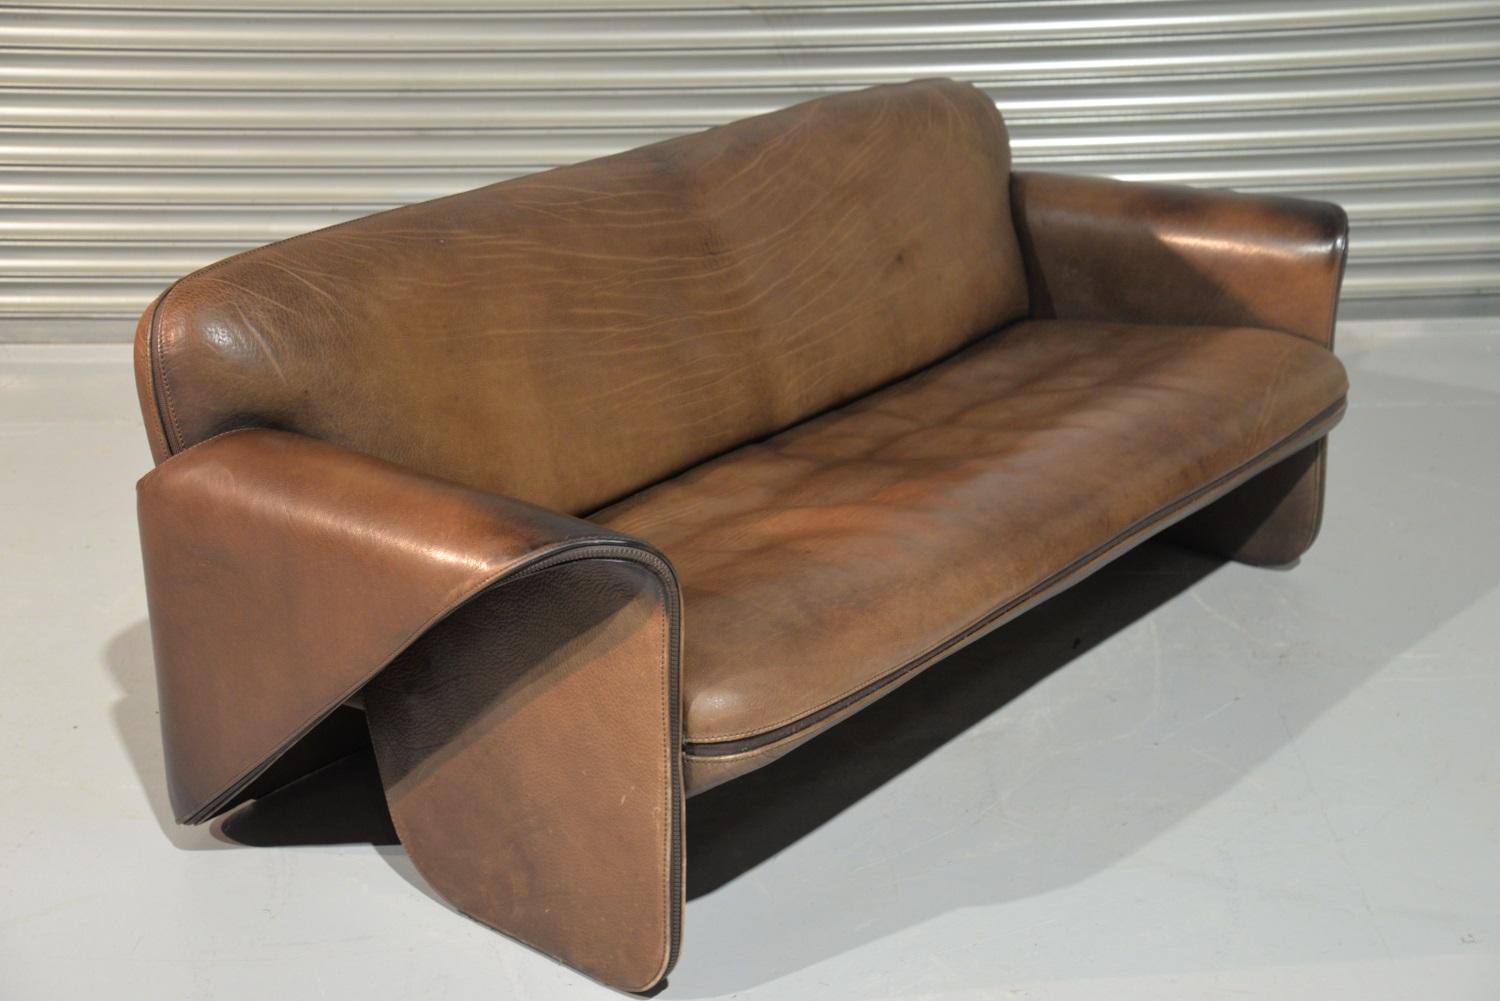 Discounted airfreight for our US and International customers (from 2 weeks door to door)

We are delighted to bring to you an ultra rare vintage De Sede DS 125 sofa designed by Gerd Lange in 1978. These sculptural pieces are upholstered in 3mm-5mm